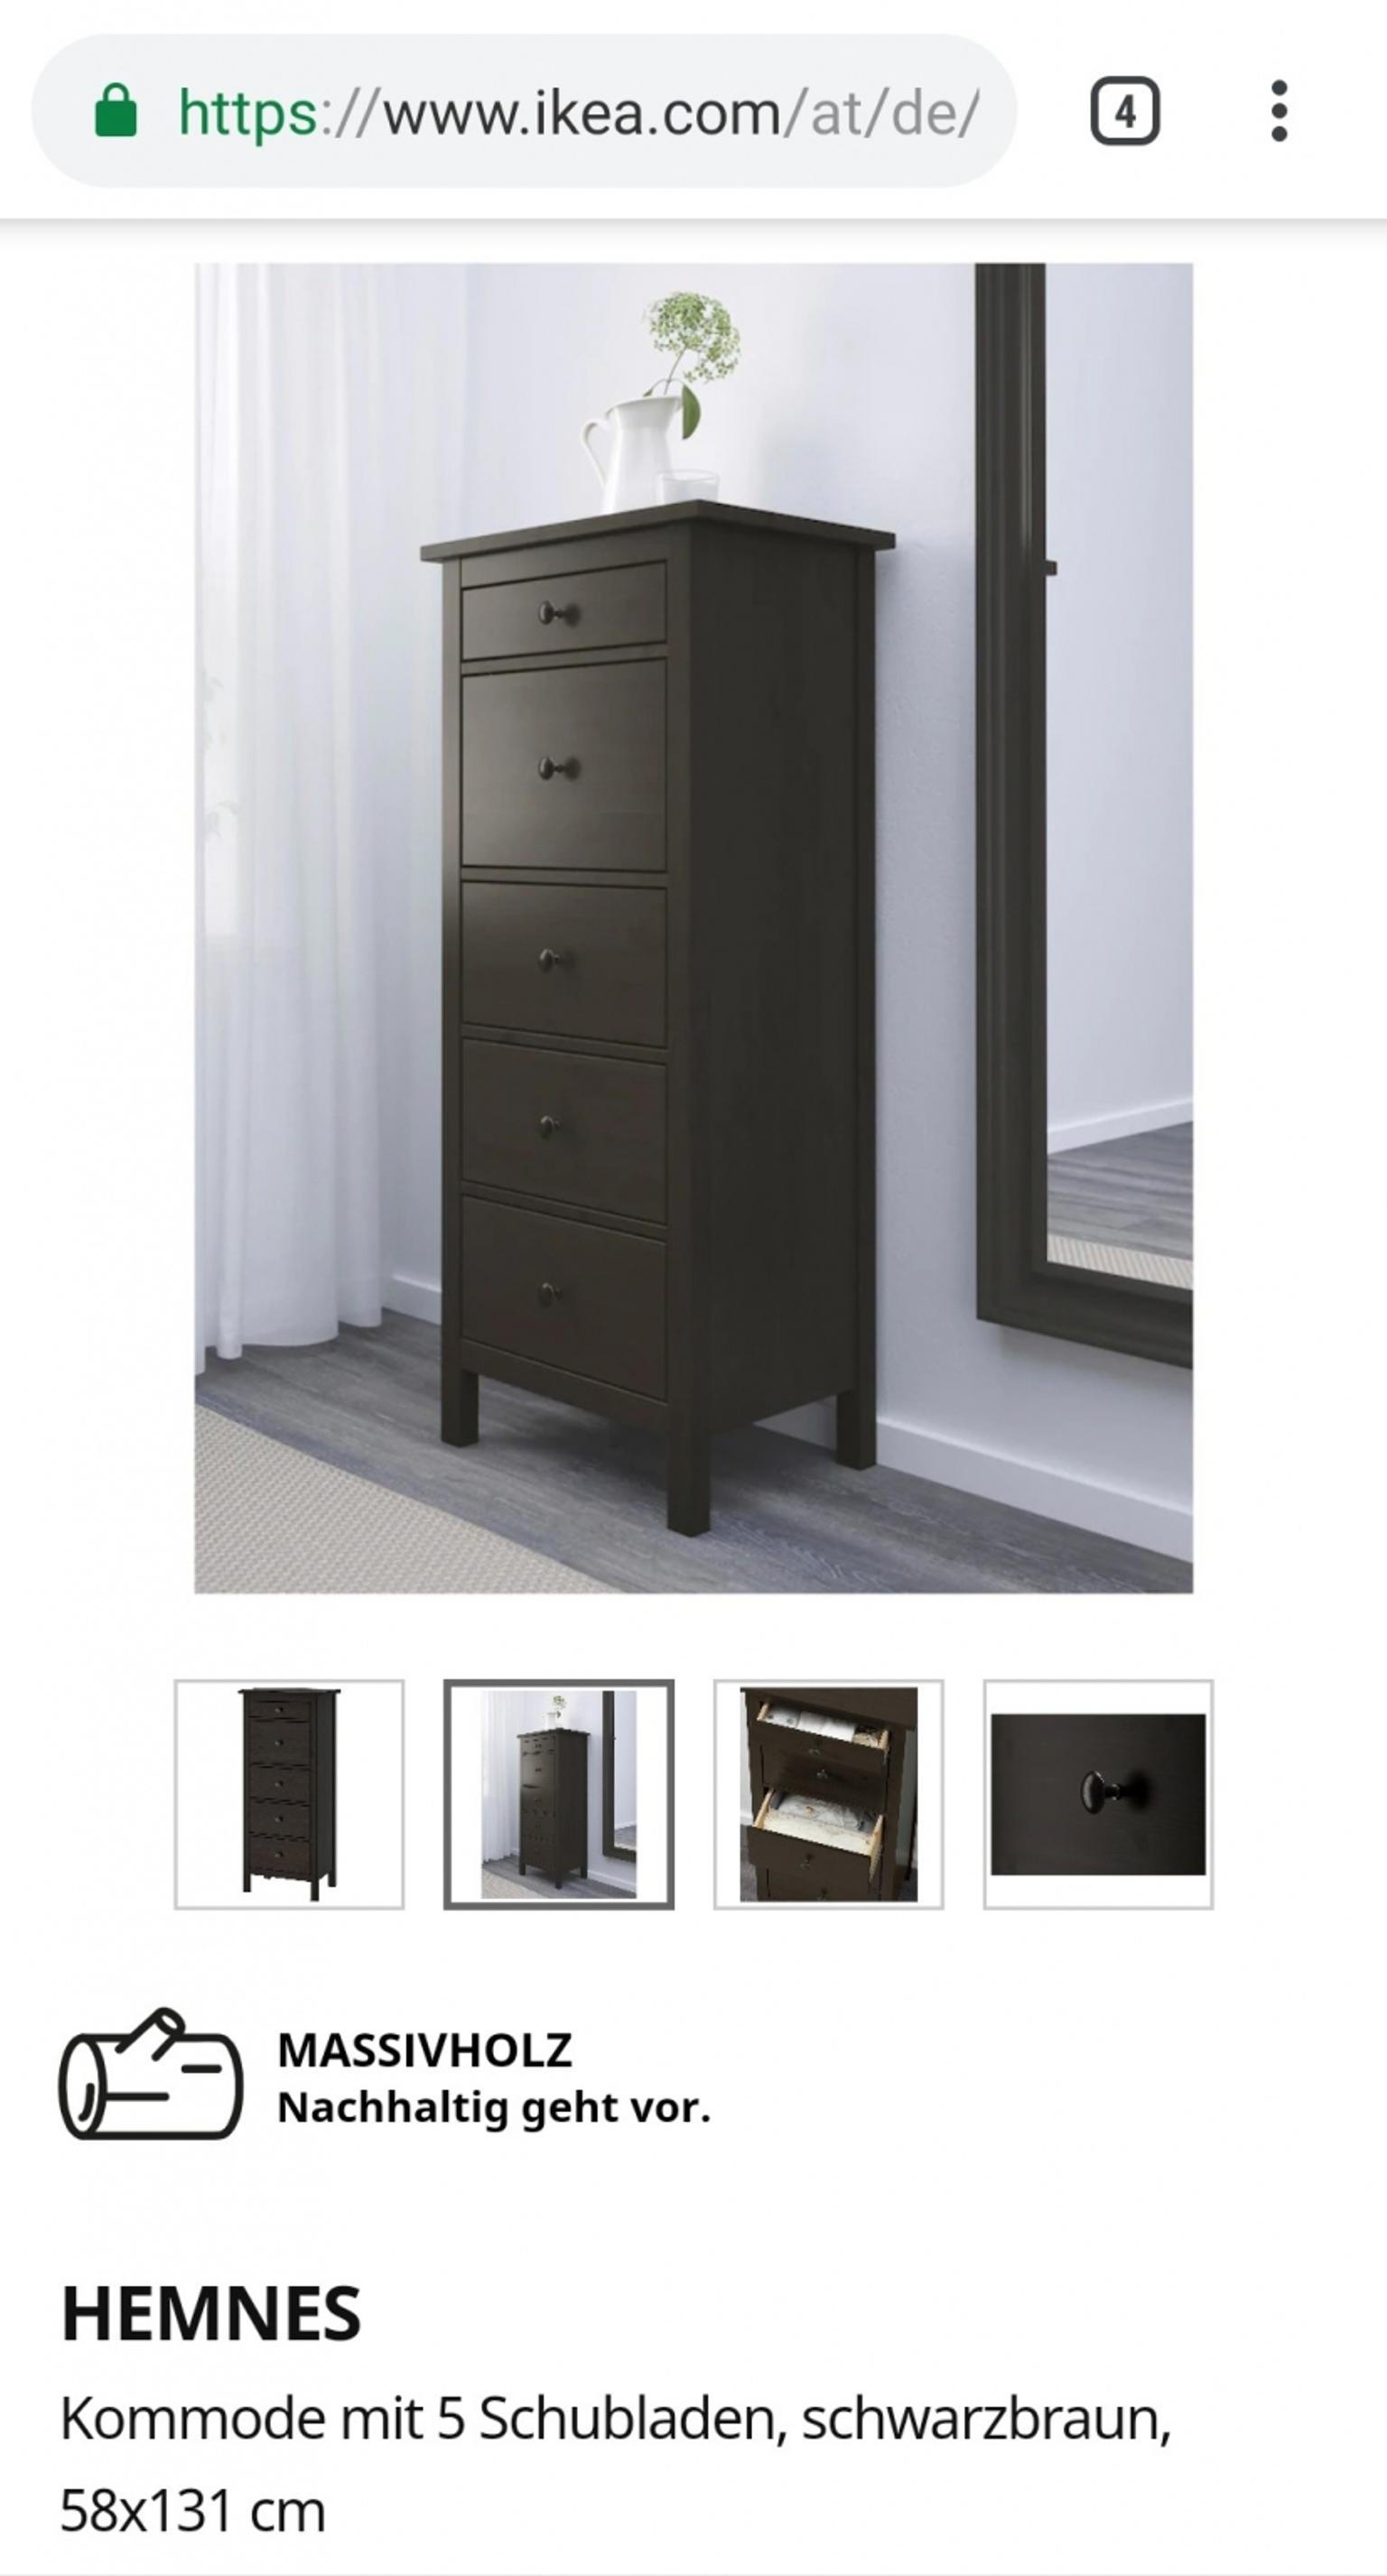 Kommode Hemnes Ikea In 40 Linz For 70 00 For Sale Shpock